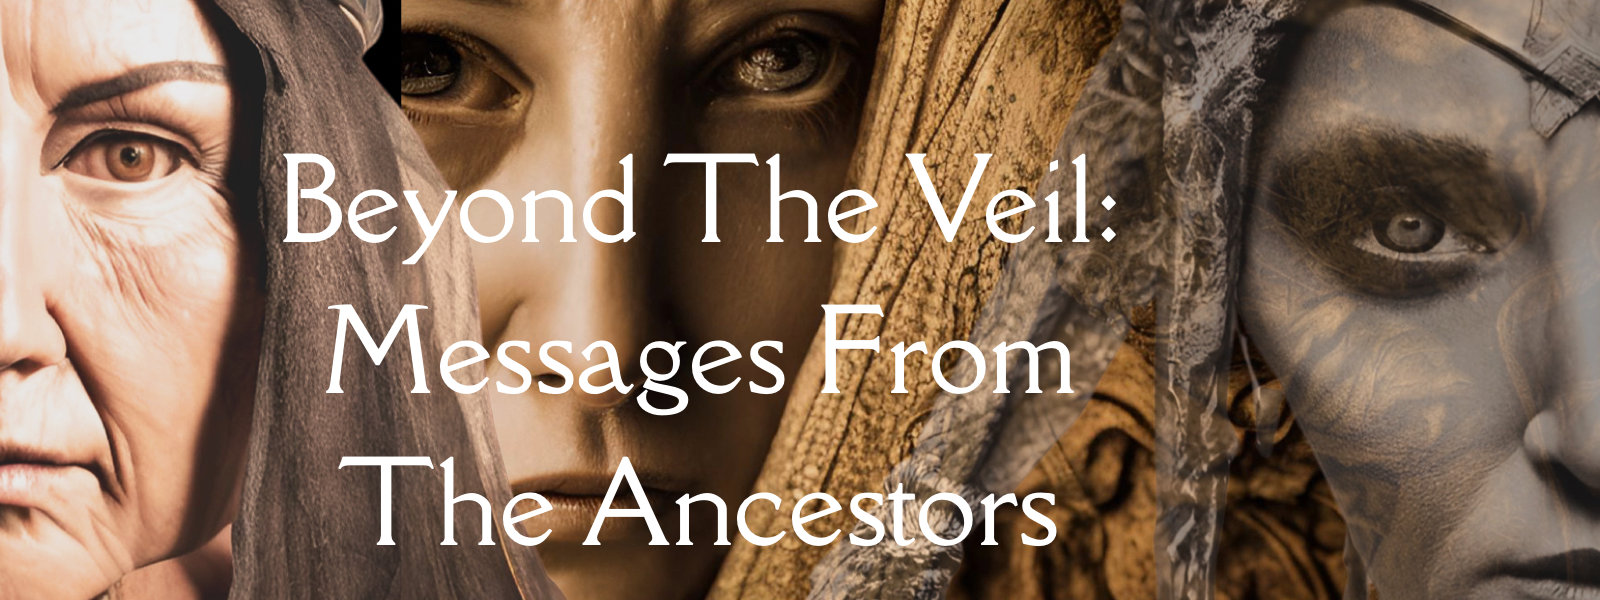 Beyond the Veil: Messages From The Ancestors show poster